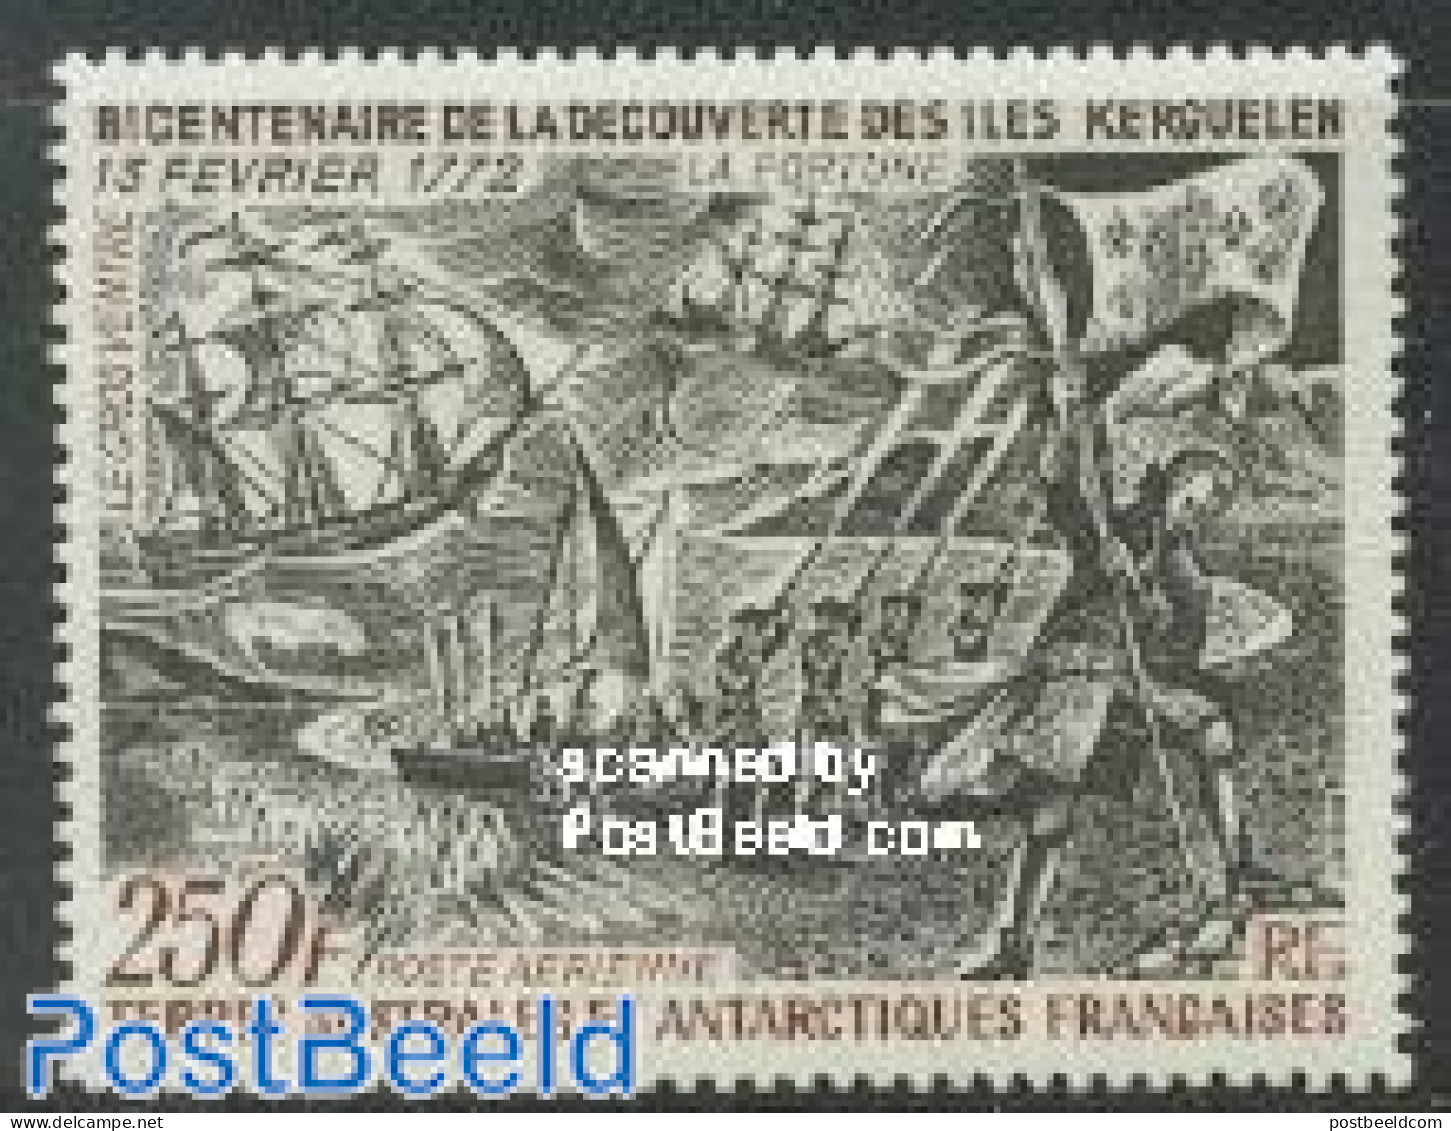 French Antarctic Territory 1972 Kerguel Islands 1v, Mint NH, History - Transport - Explorers - Ships And Boats - Unused Stamps